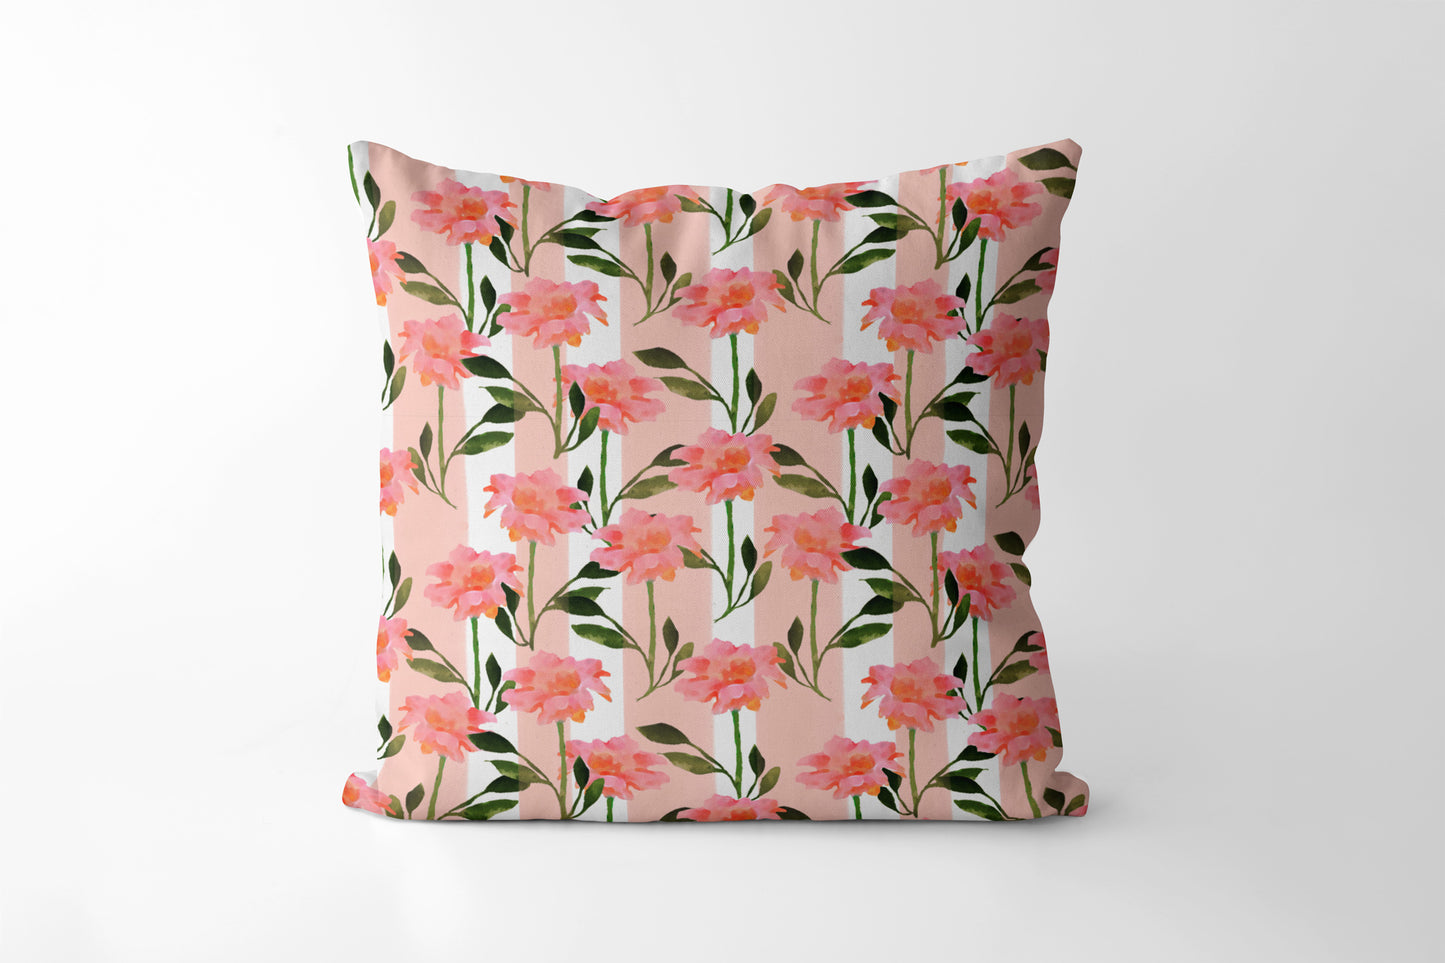 Watercolor Peachy Floral Pattern  - Square Cushion